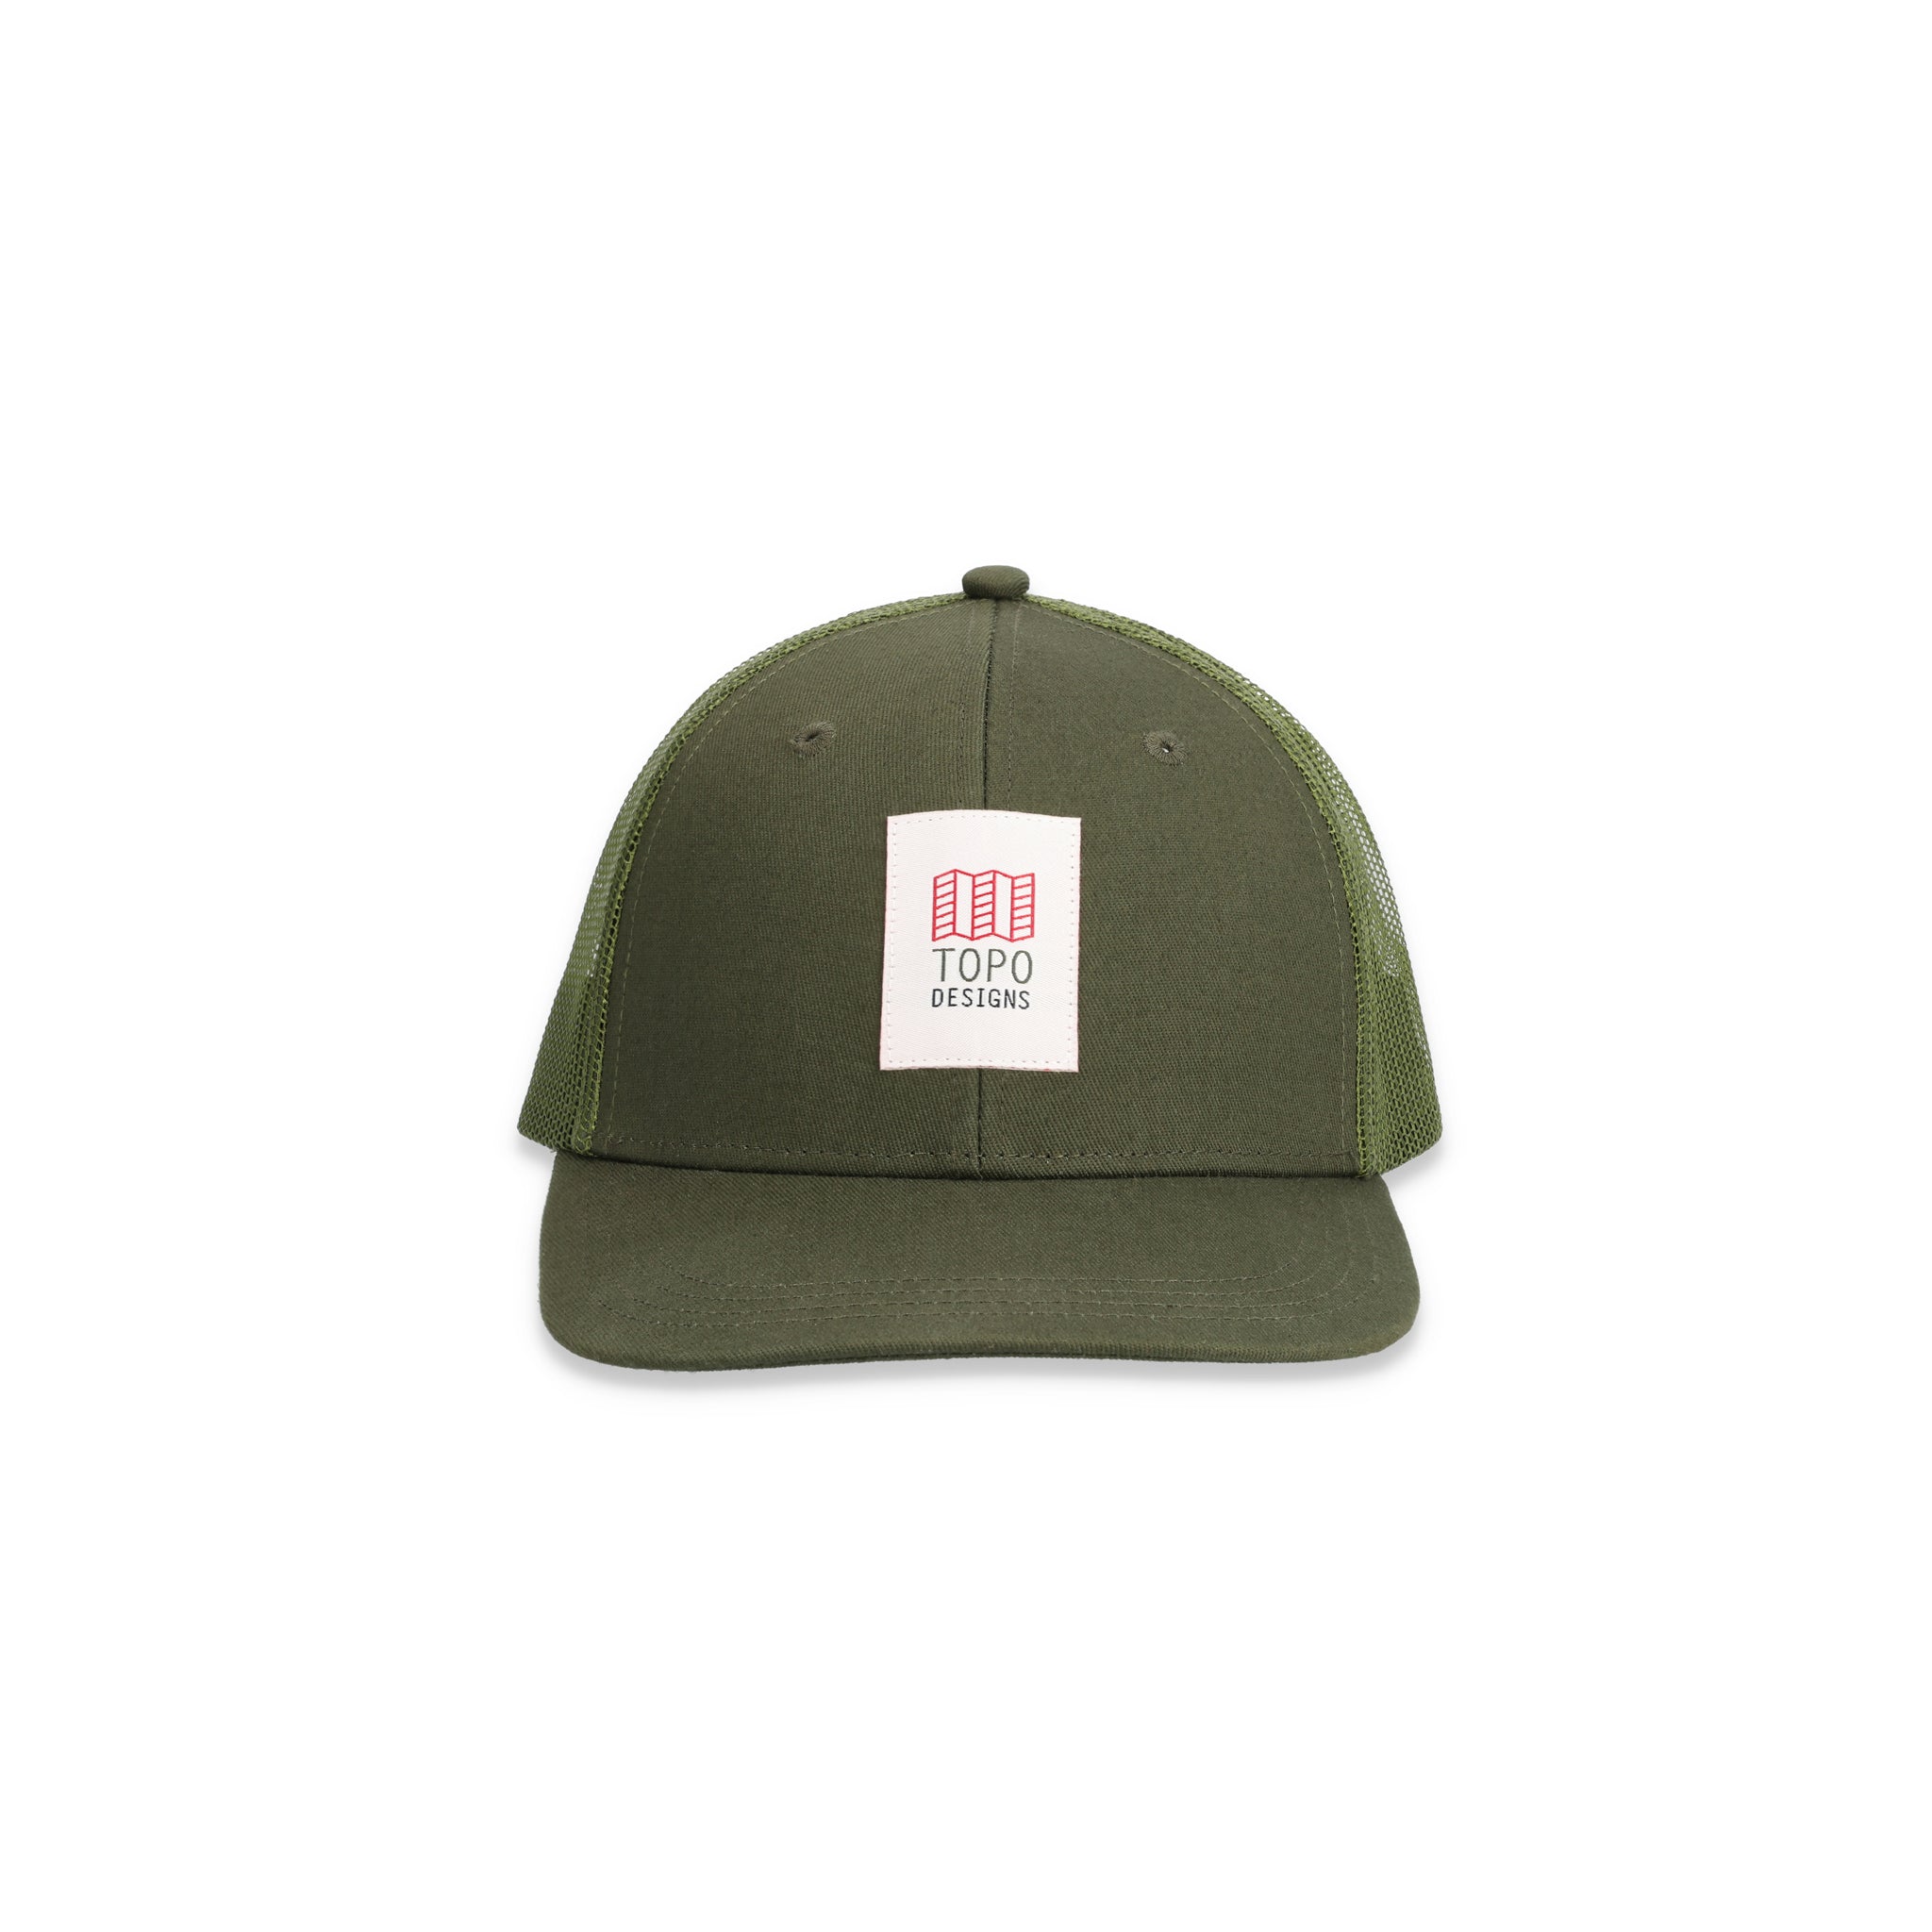 Topo Designs Trucker Hat with mesh back and original logo patch in "Olive" green.